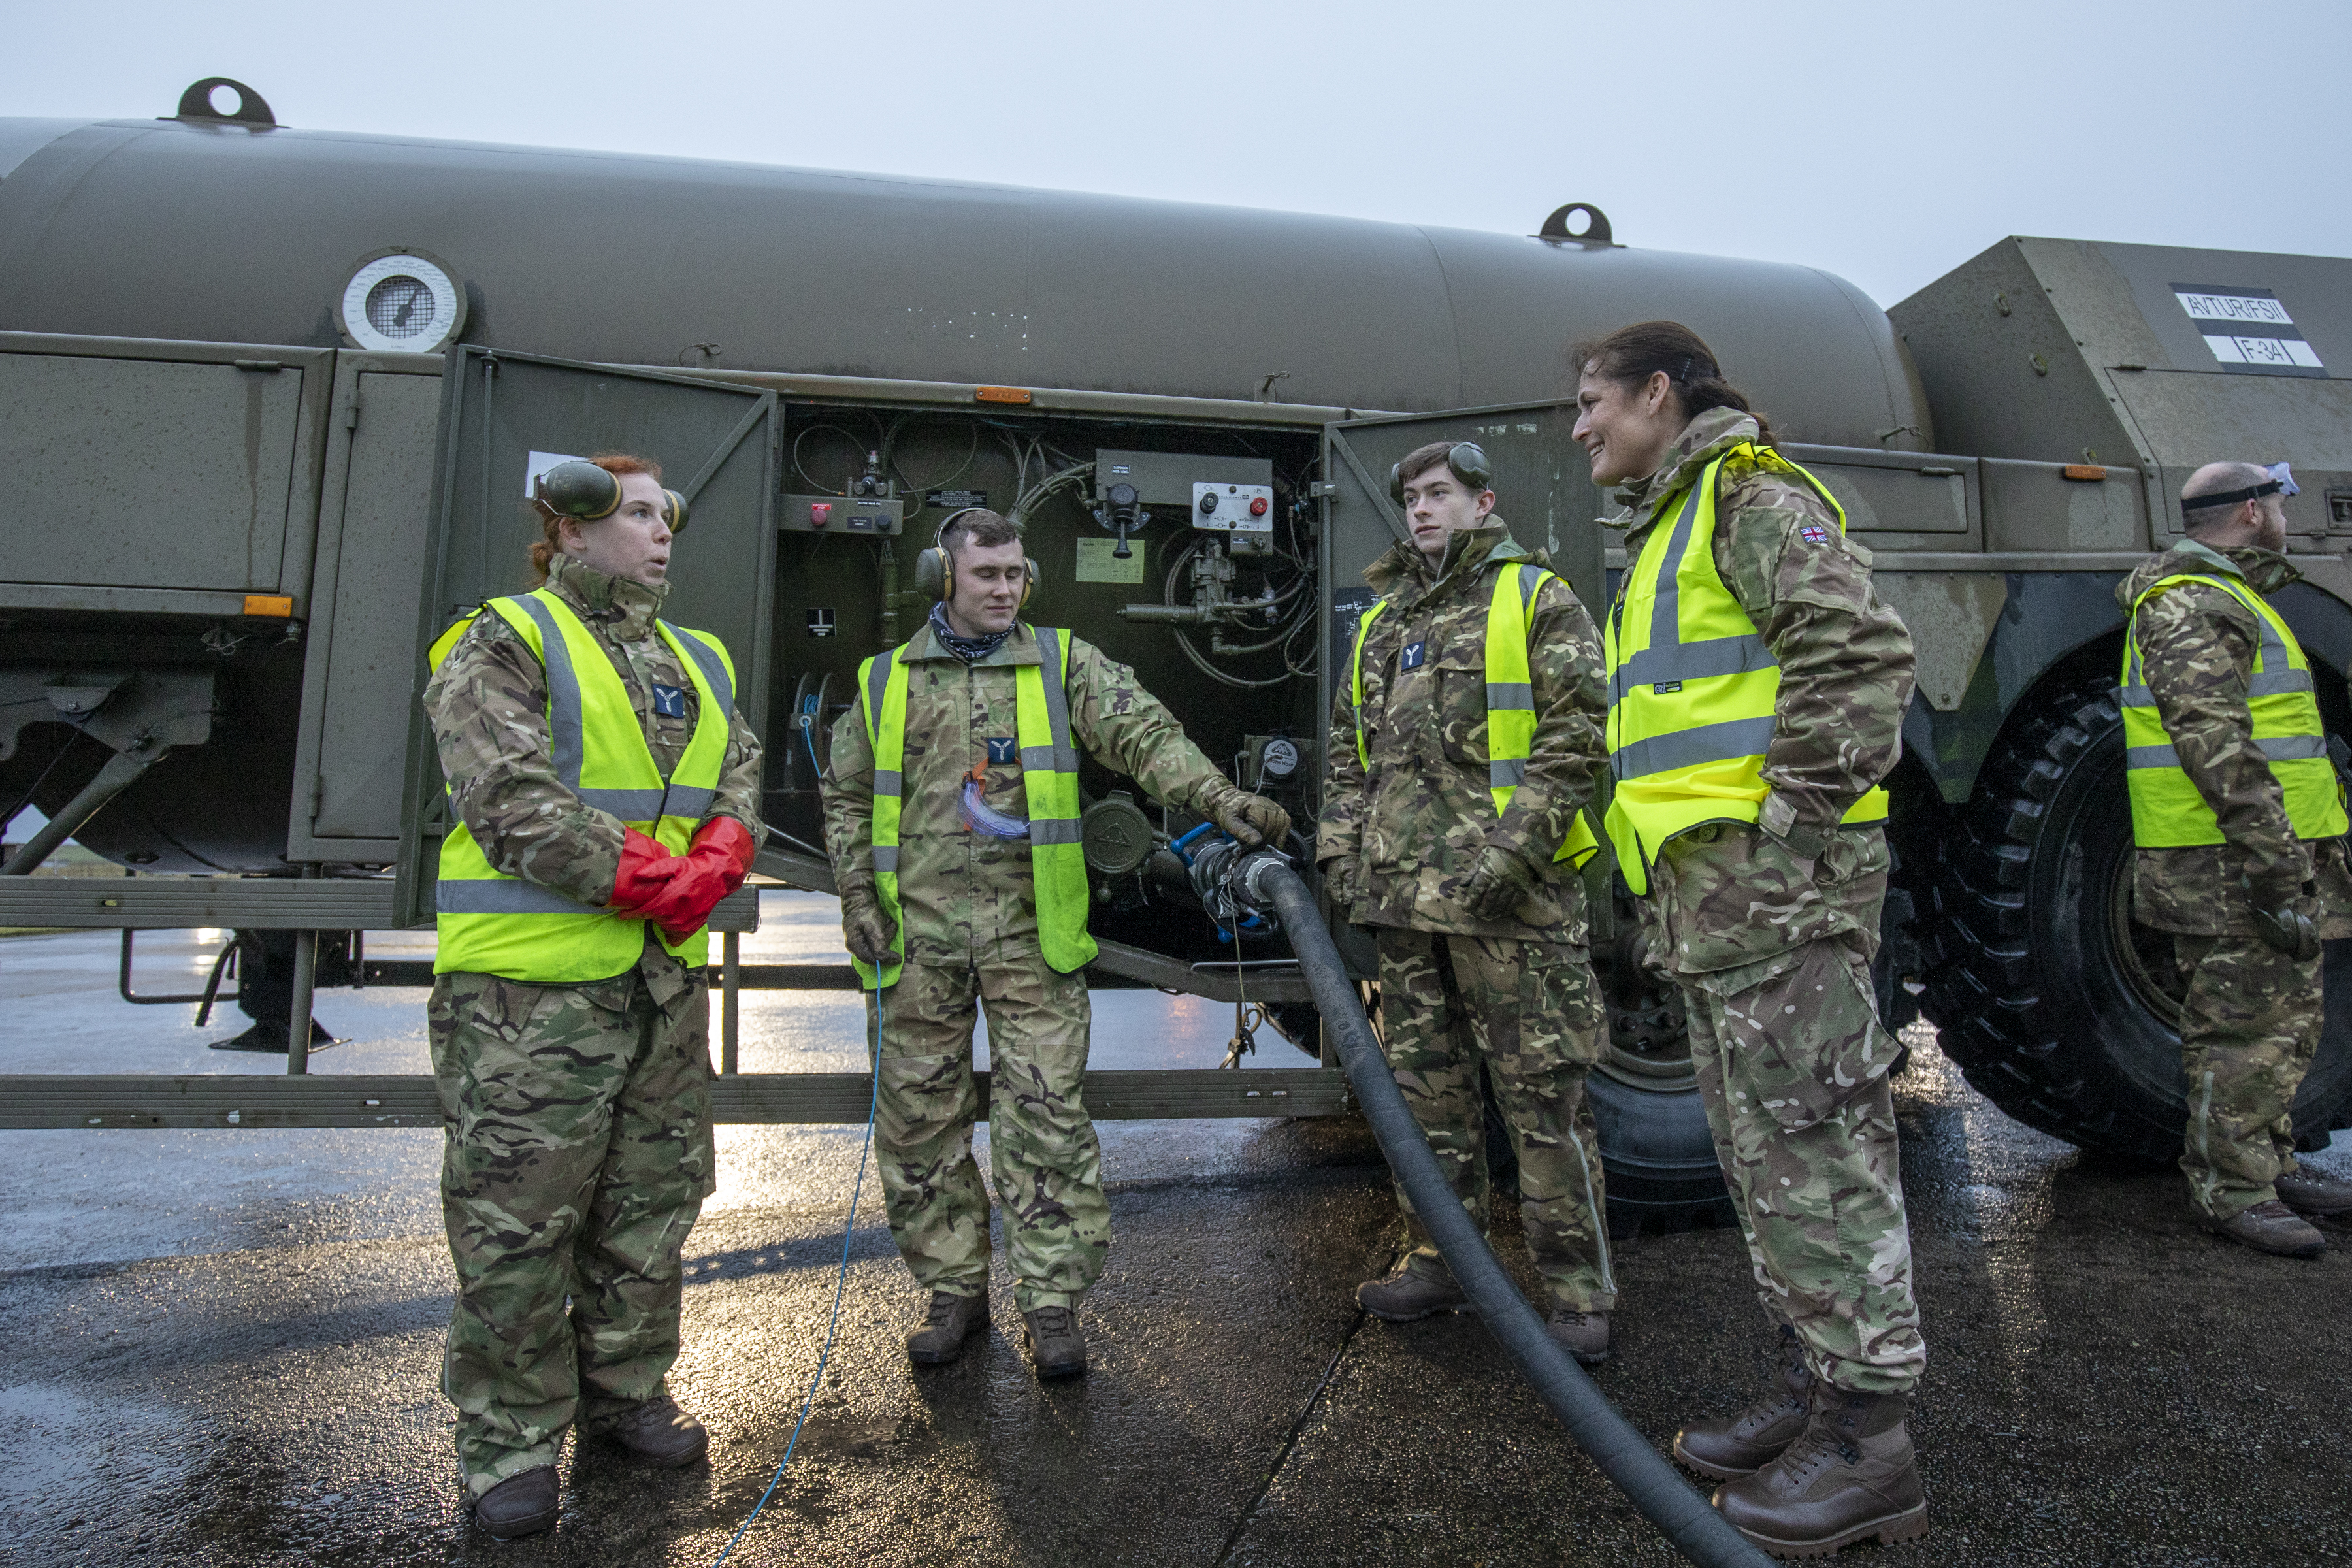 Personnel stand around refuelling tanker vehicle and pump.